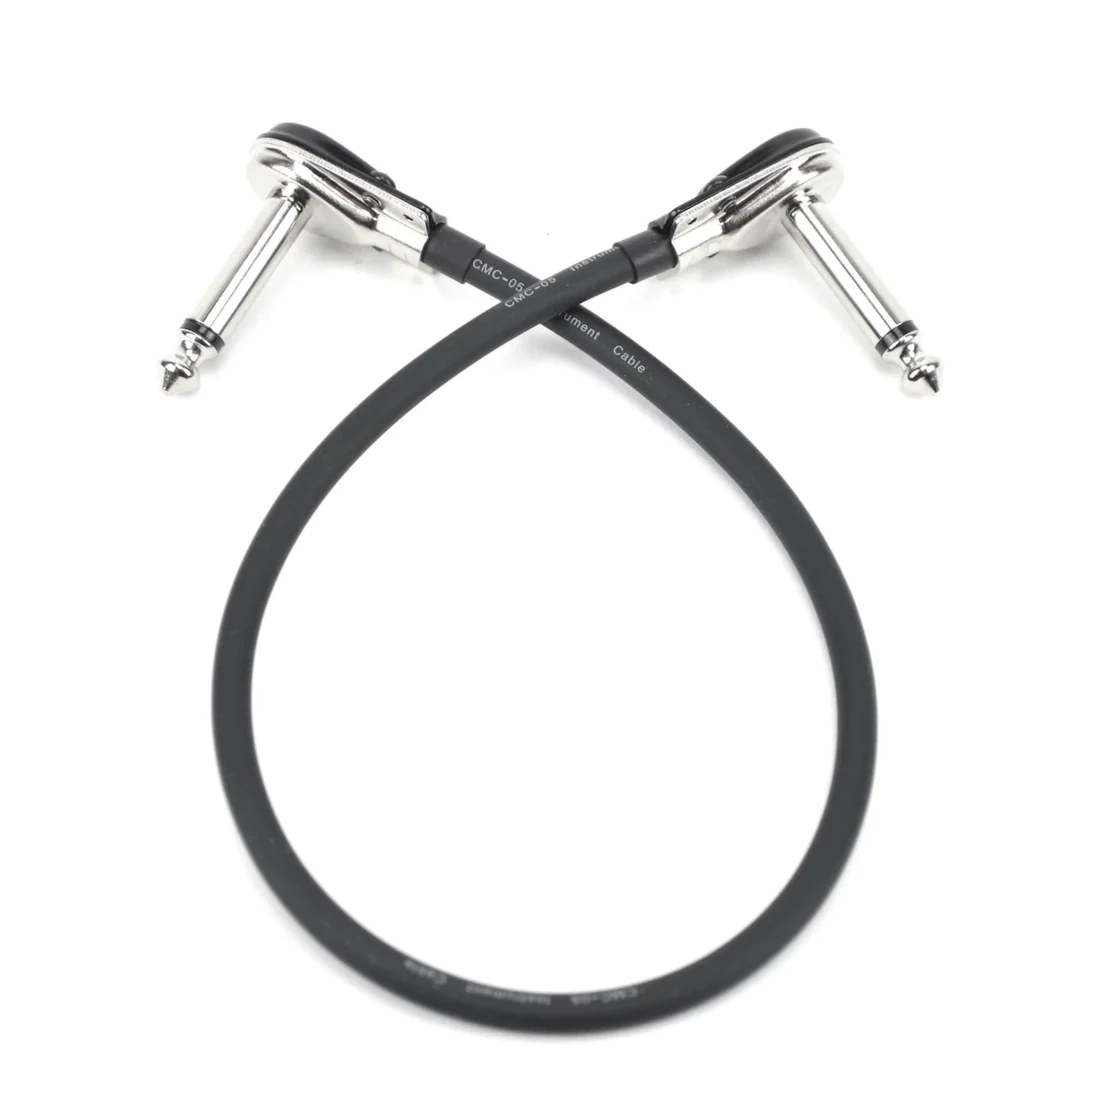 Minicake Patch Cable 12 Inch 約30cm パッチケーブル